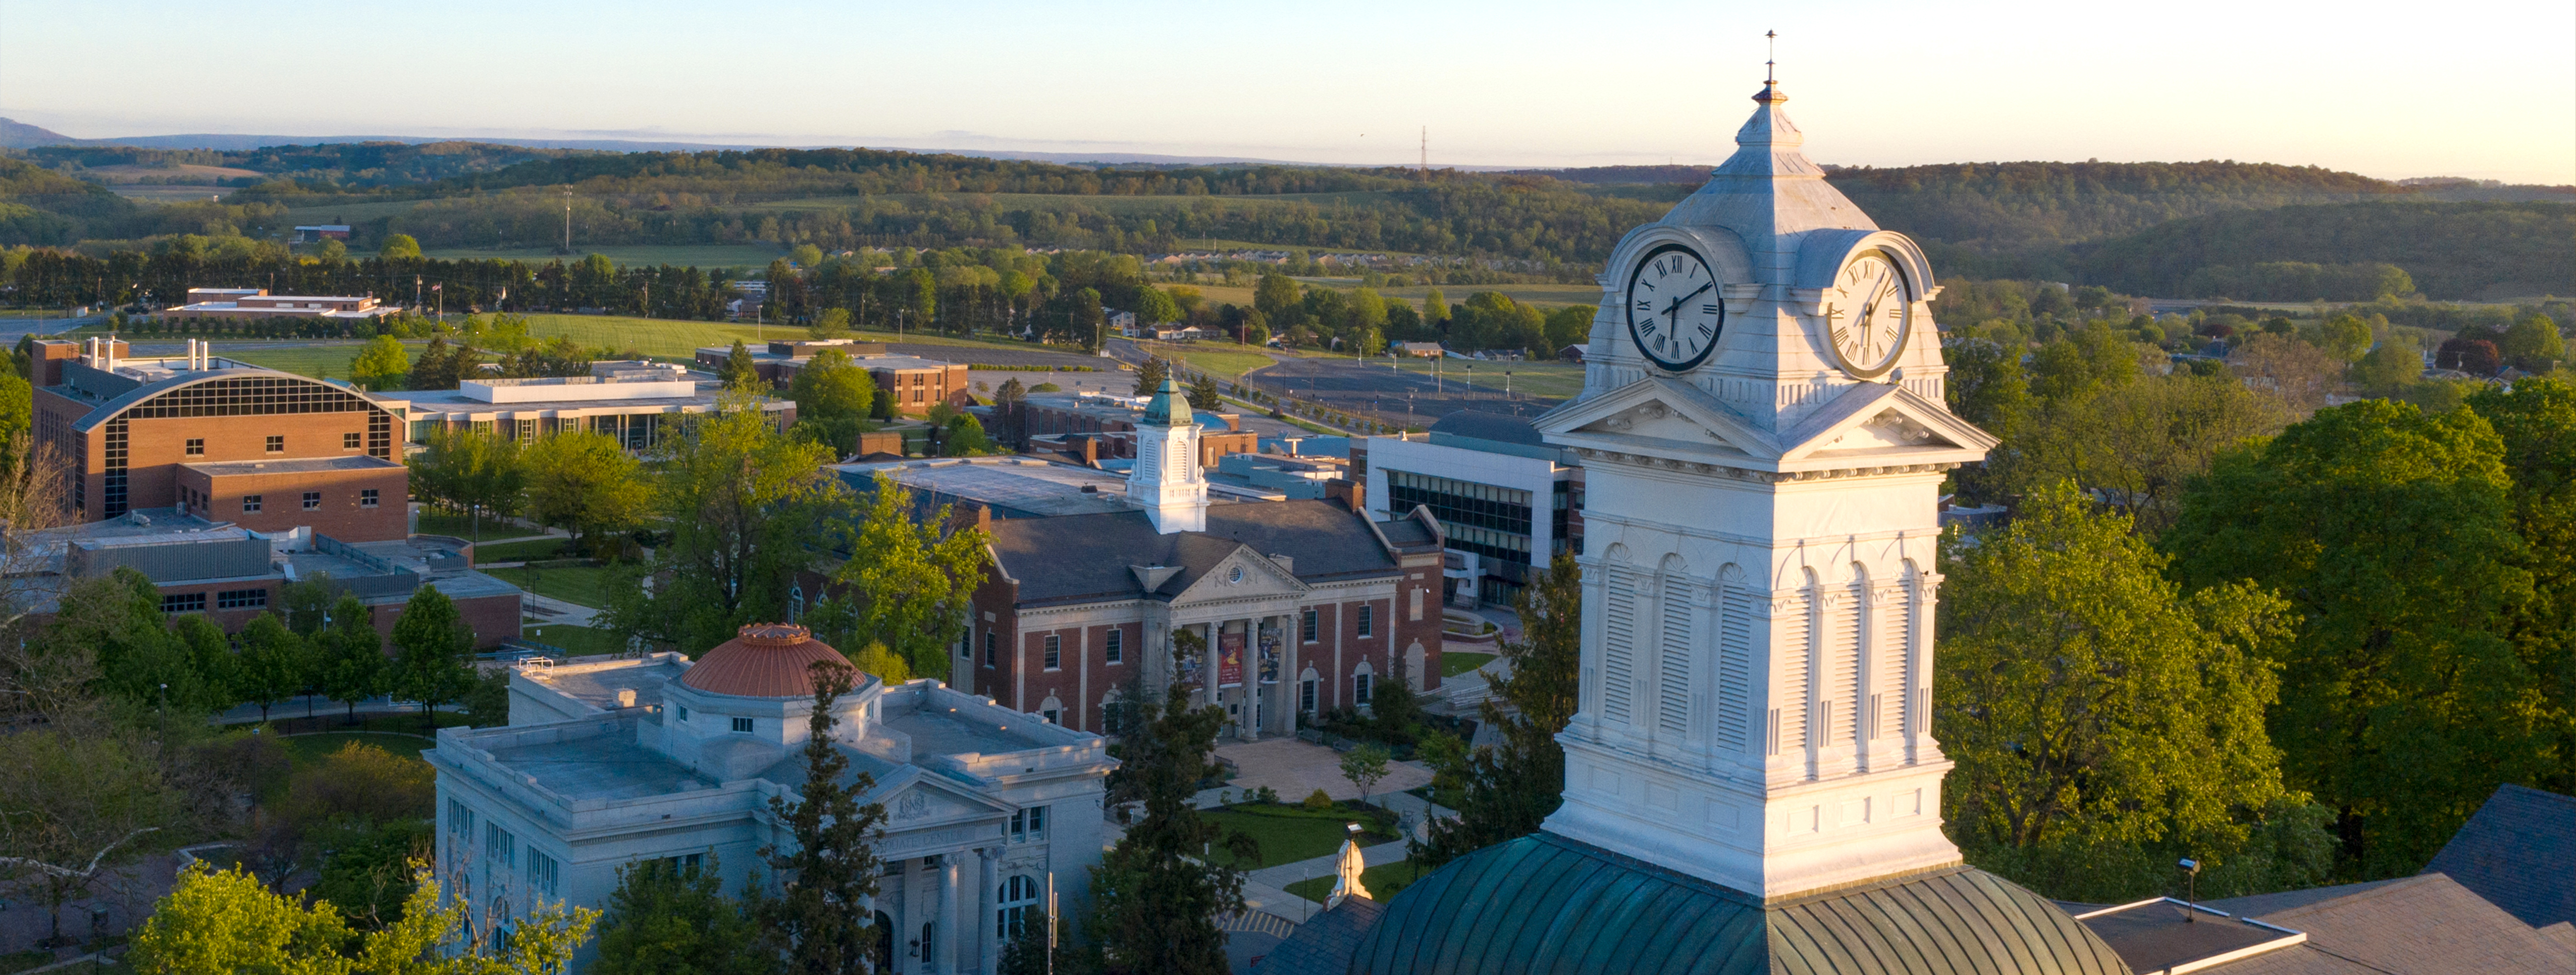 Drone picture of Old Main clocktower with classrooms in the background